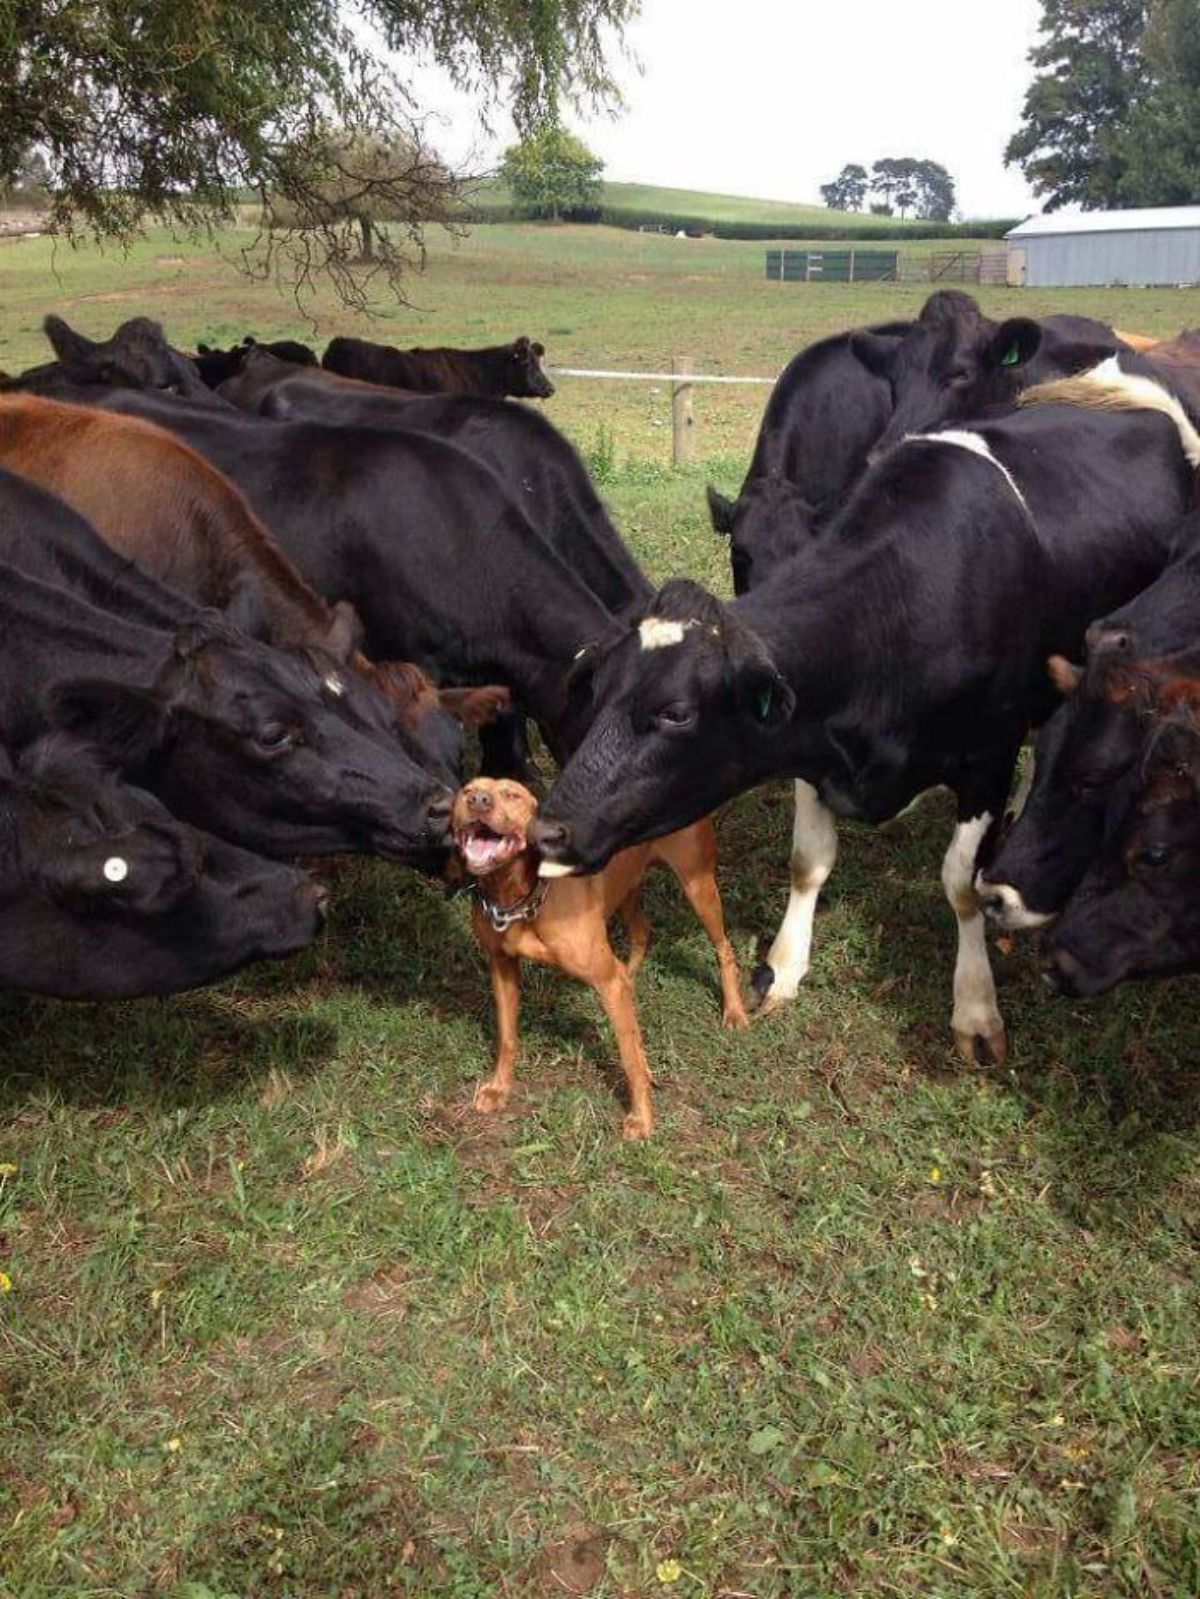 black and white and brown cows standing in a field nuzzling a brown dog standing in the middle